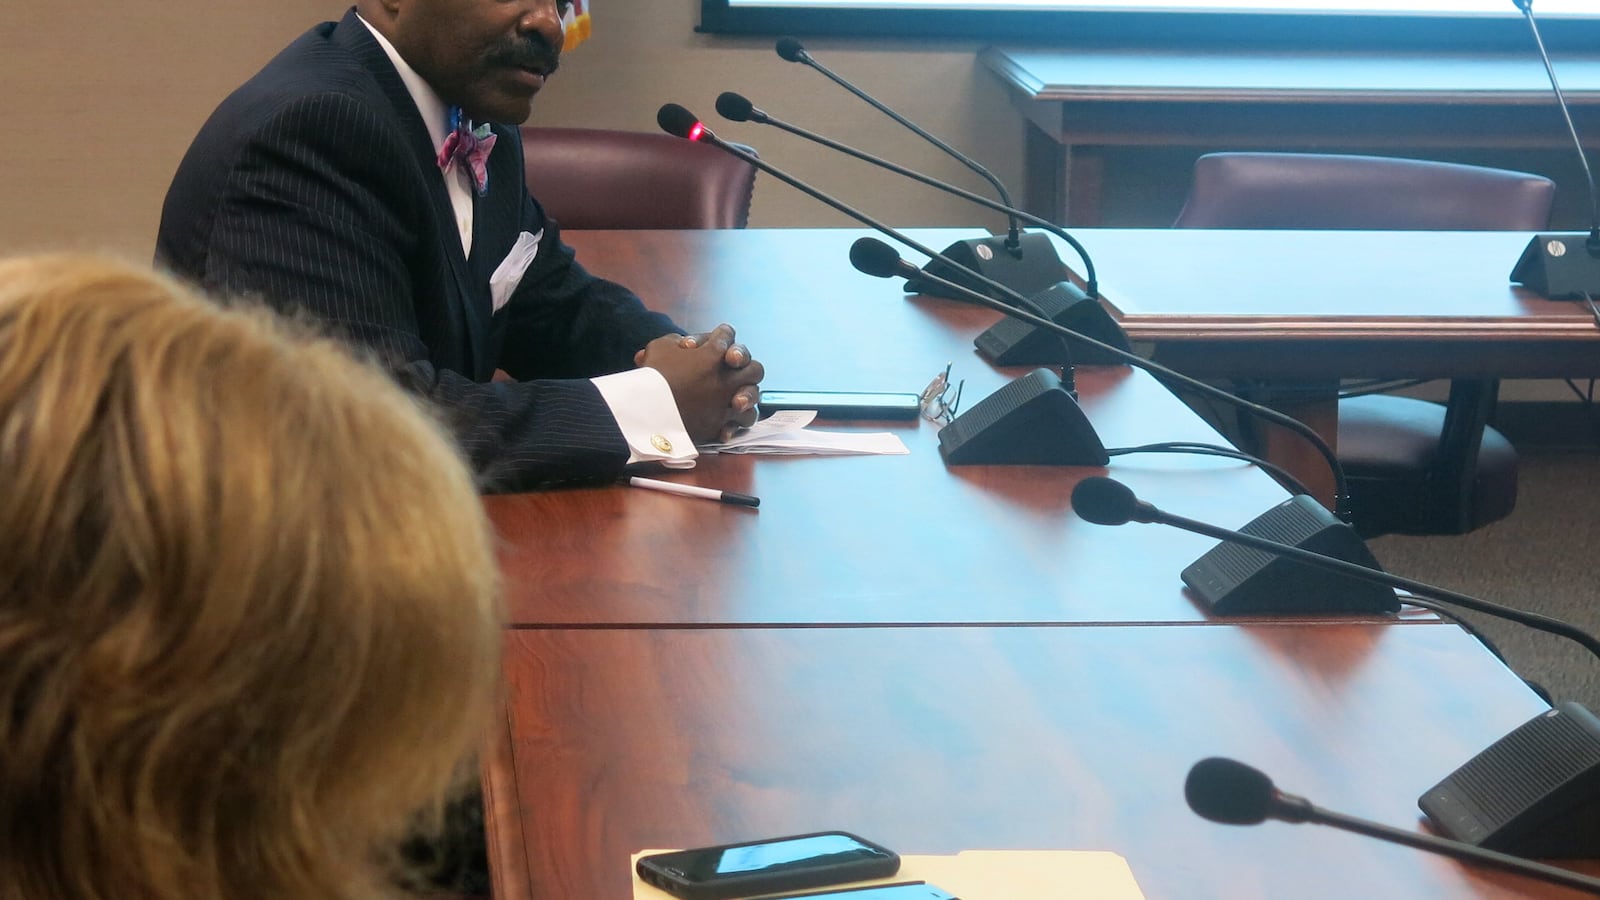 State Rep. G.A. Hardaway asks the State Board to reject the Shelby County board’s decision.